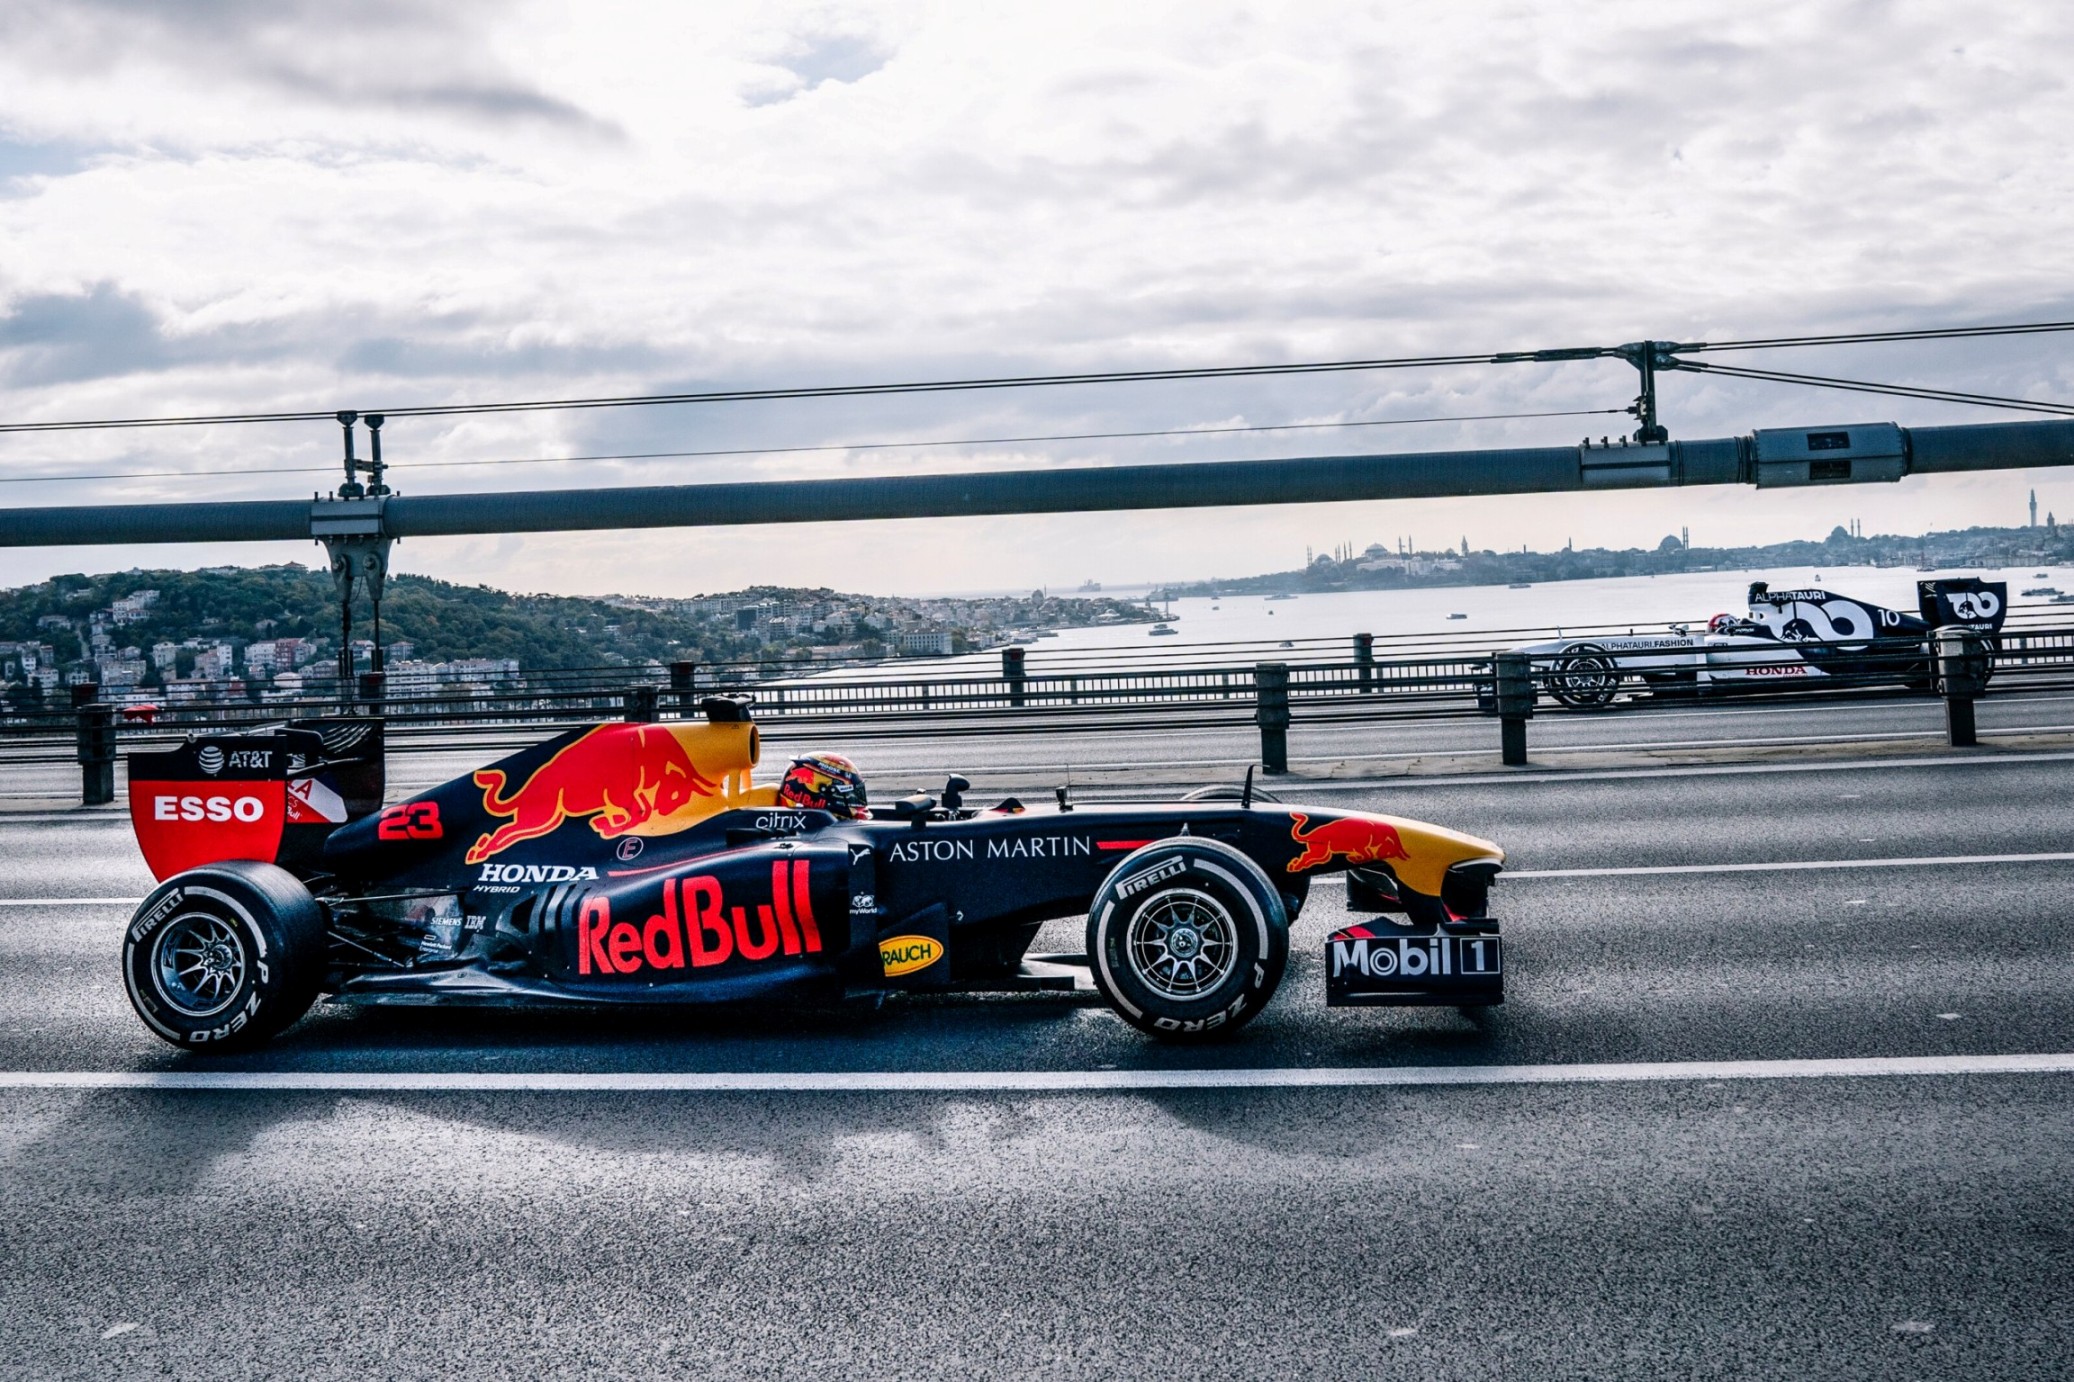 Alexander Albon and Pierre Gasly perform during Project Istanbulls in Istanbul, Turkey on November 10, 2020 // Nuri Yilmazer/Red Bull Content Pool // SI202011110239 // Usage for editorial use only //